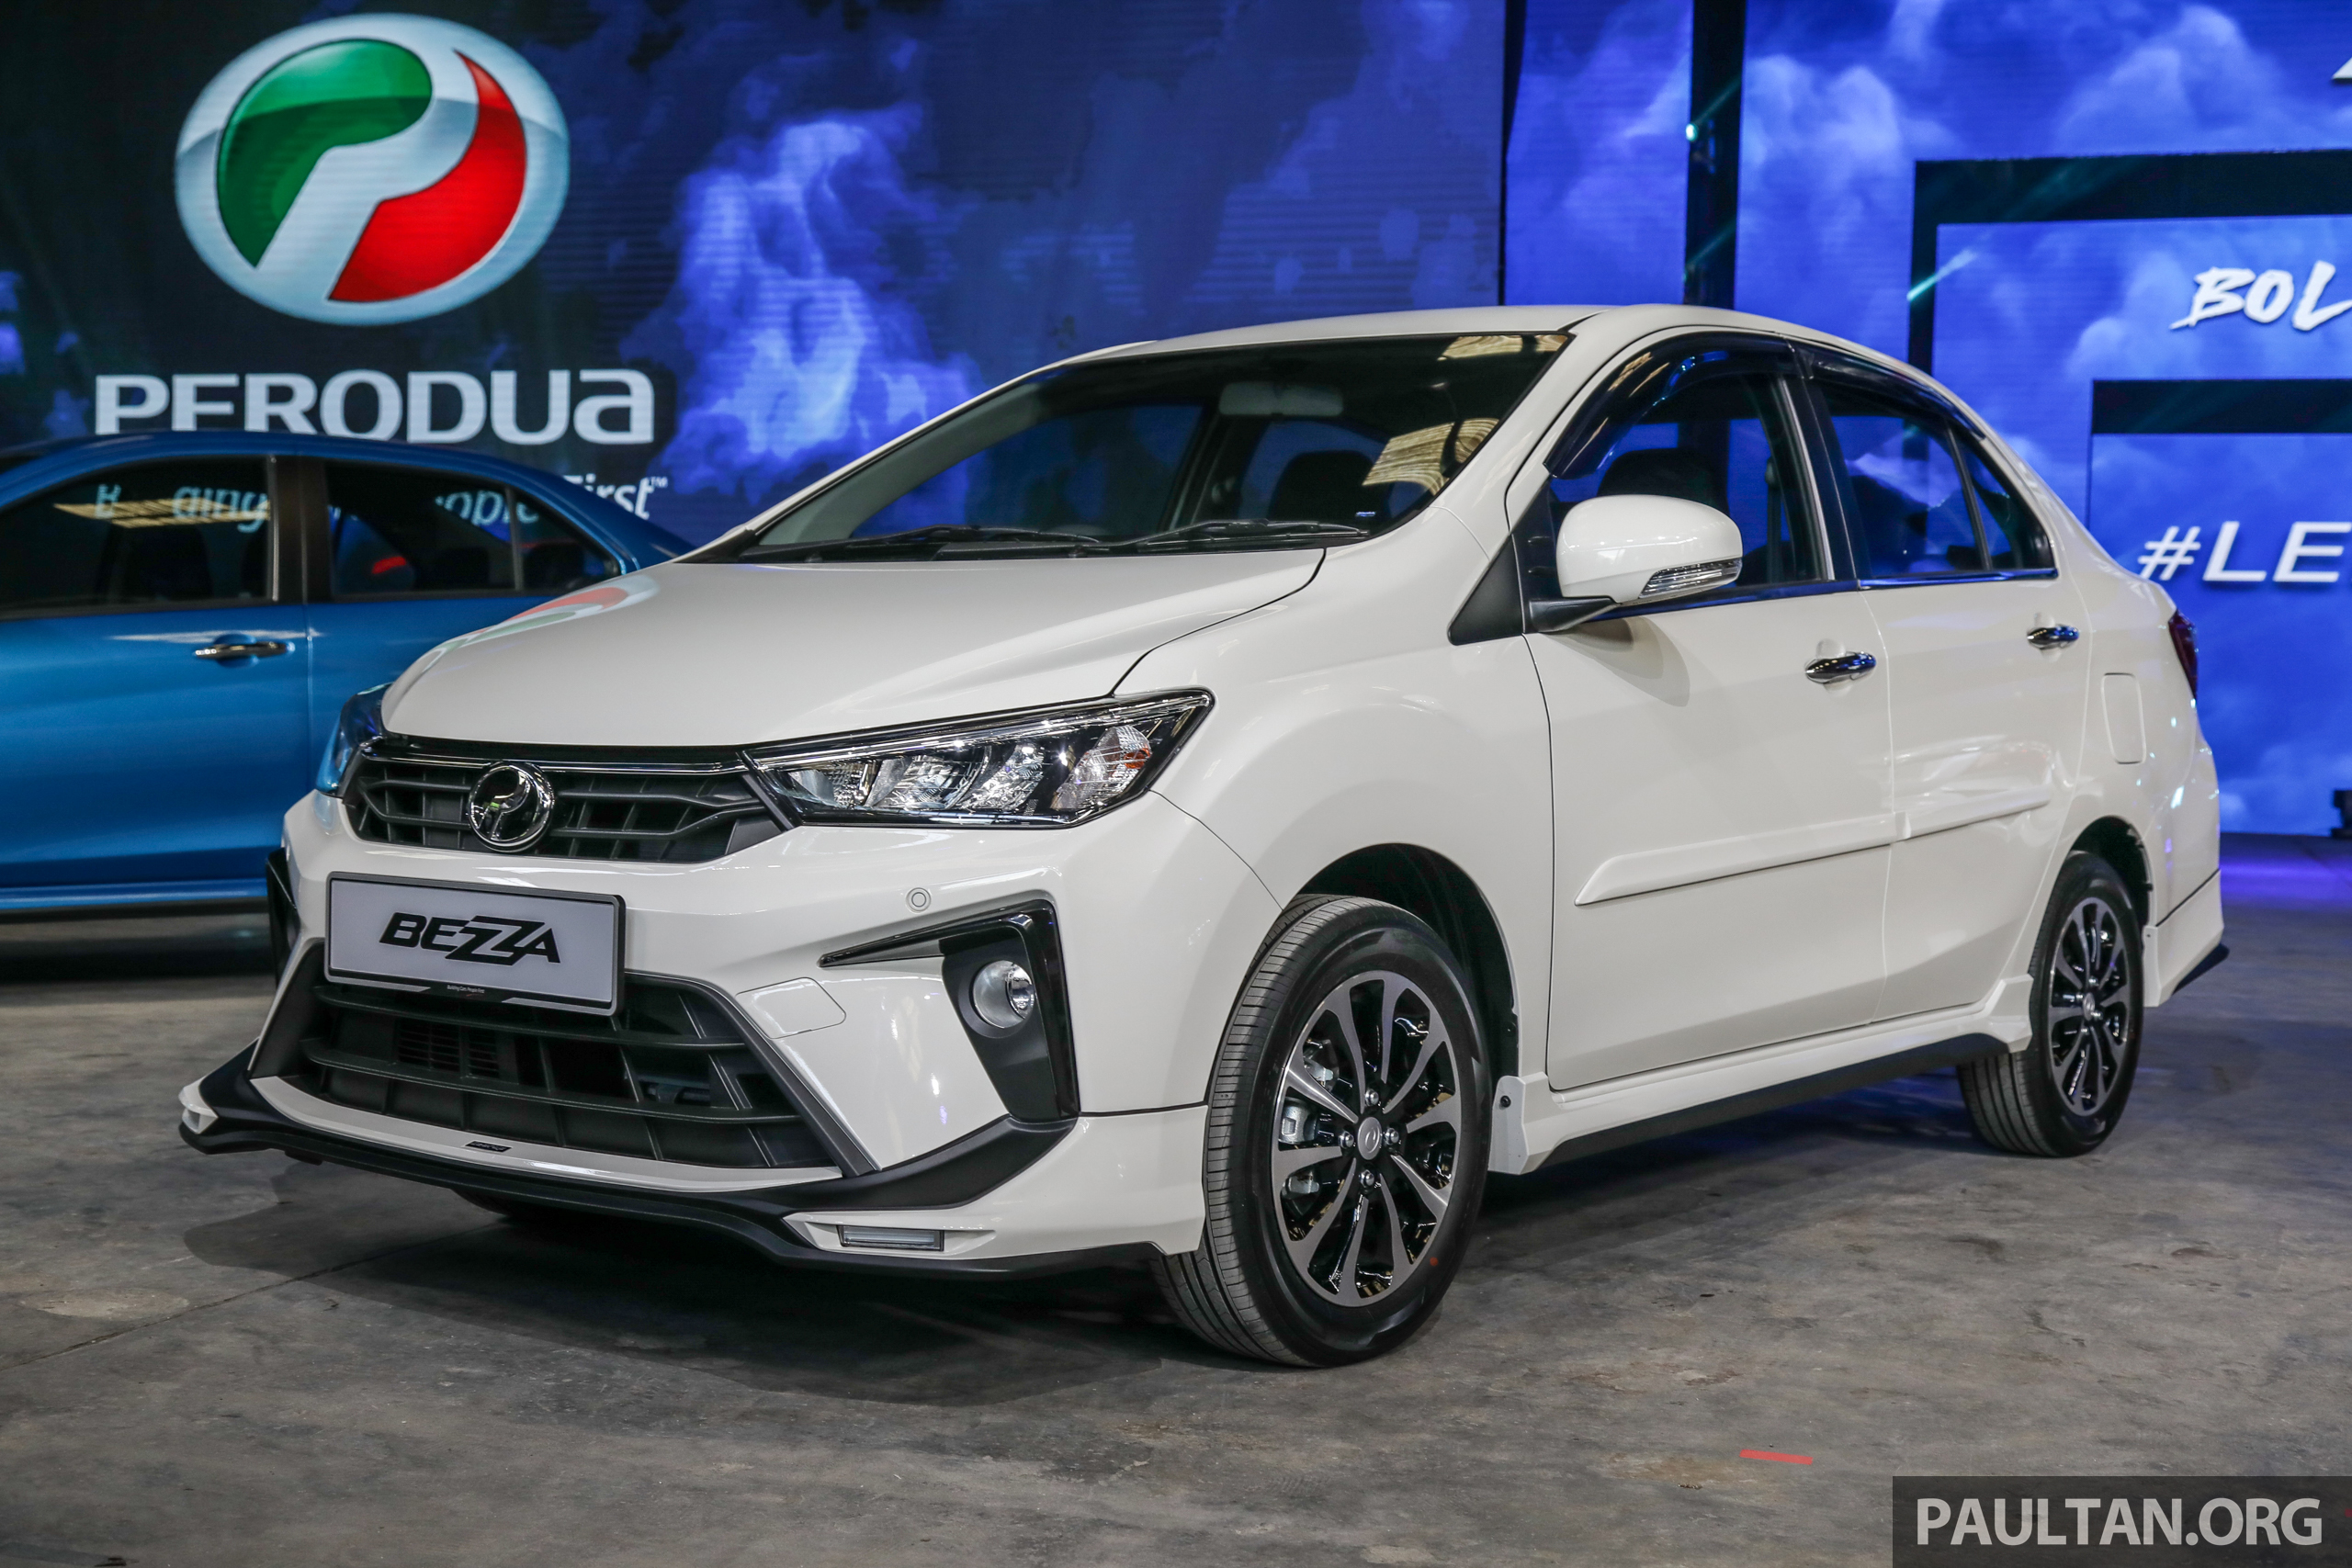 2020 Perodua Bezza GearUp accessories – full bodykit with LED light